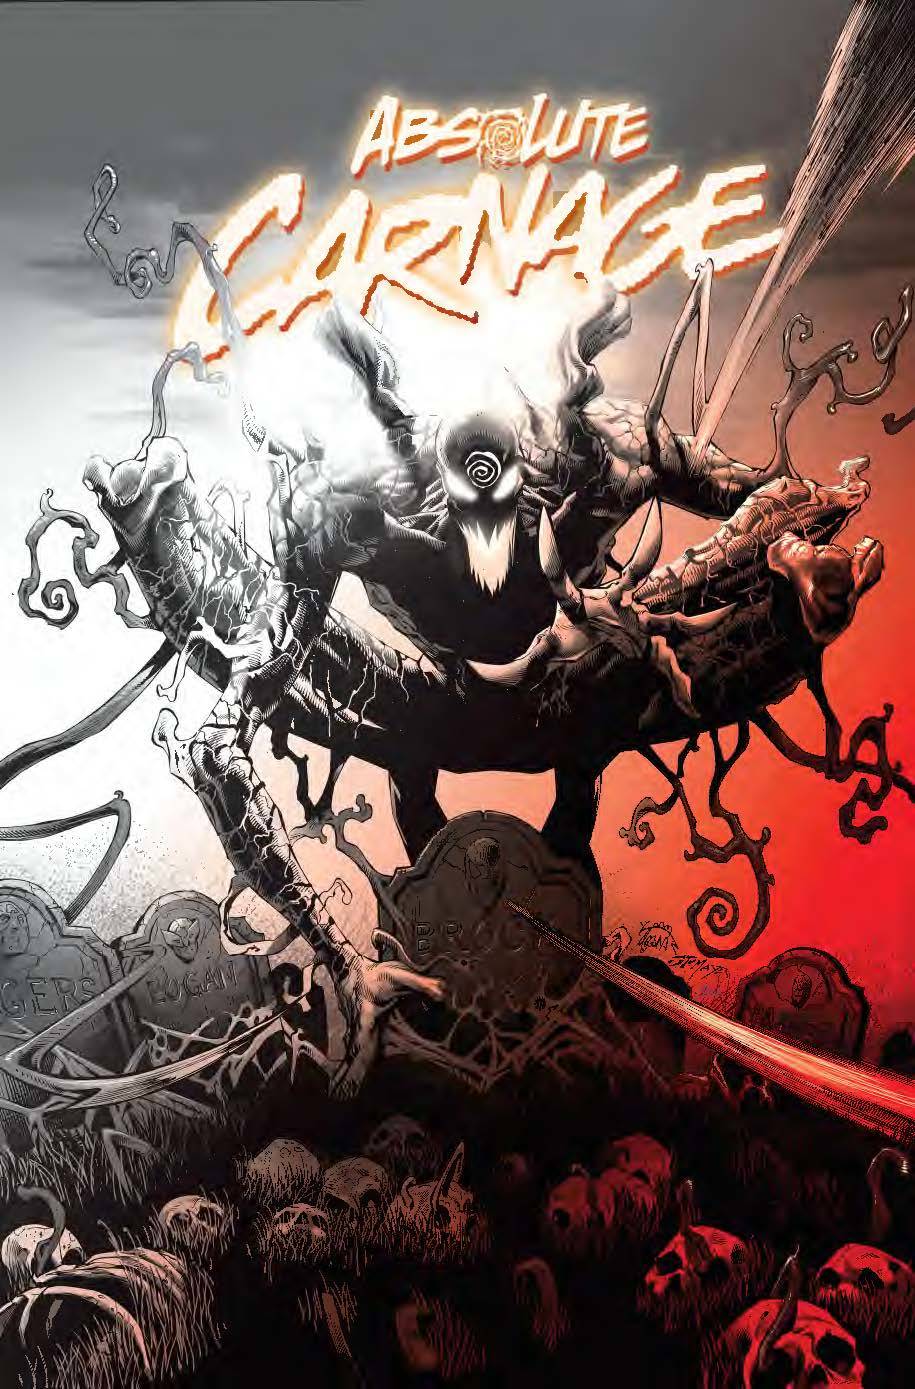 Absolute Carnage #1 Stegman Premiere Variant (Of 4)